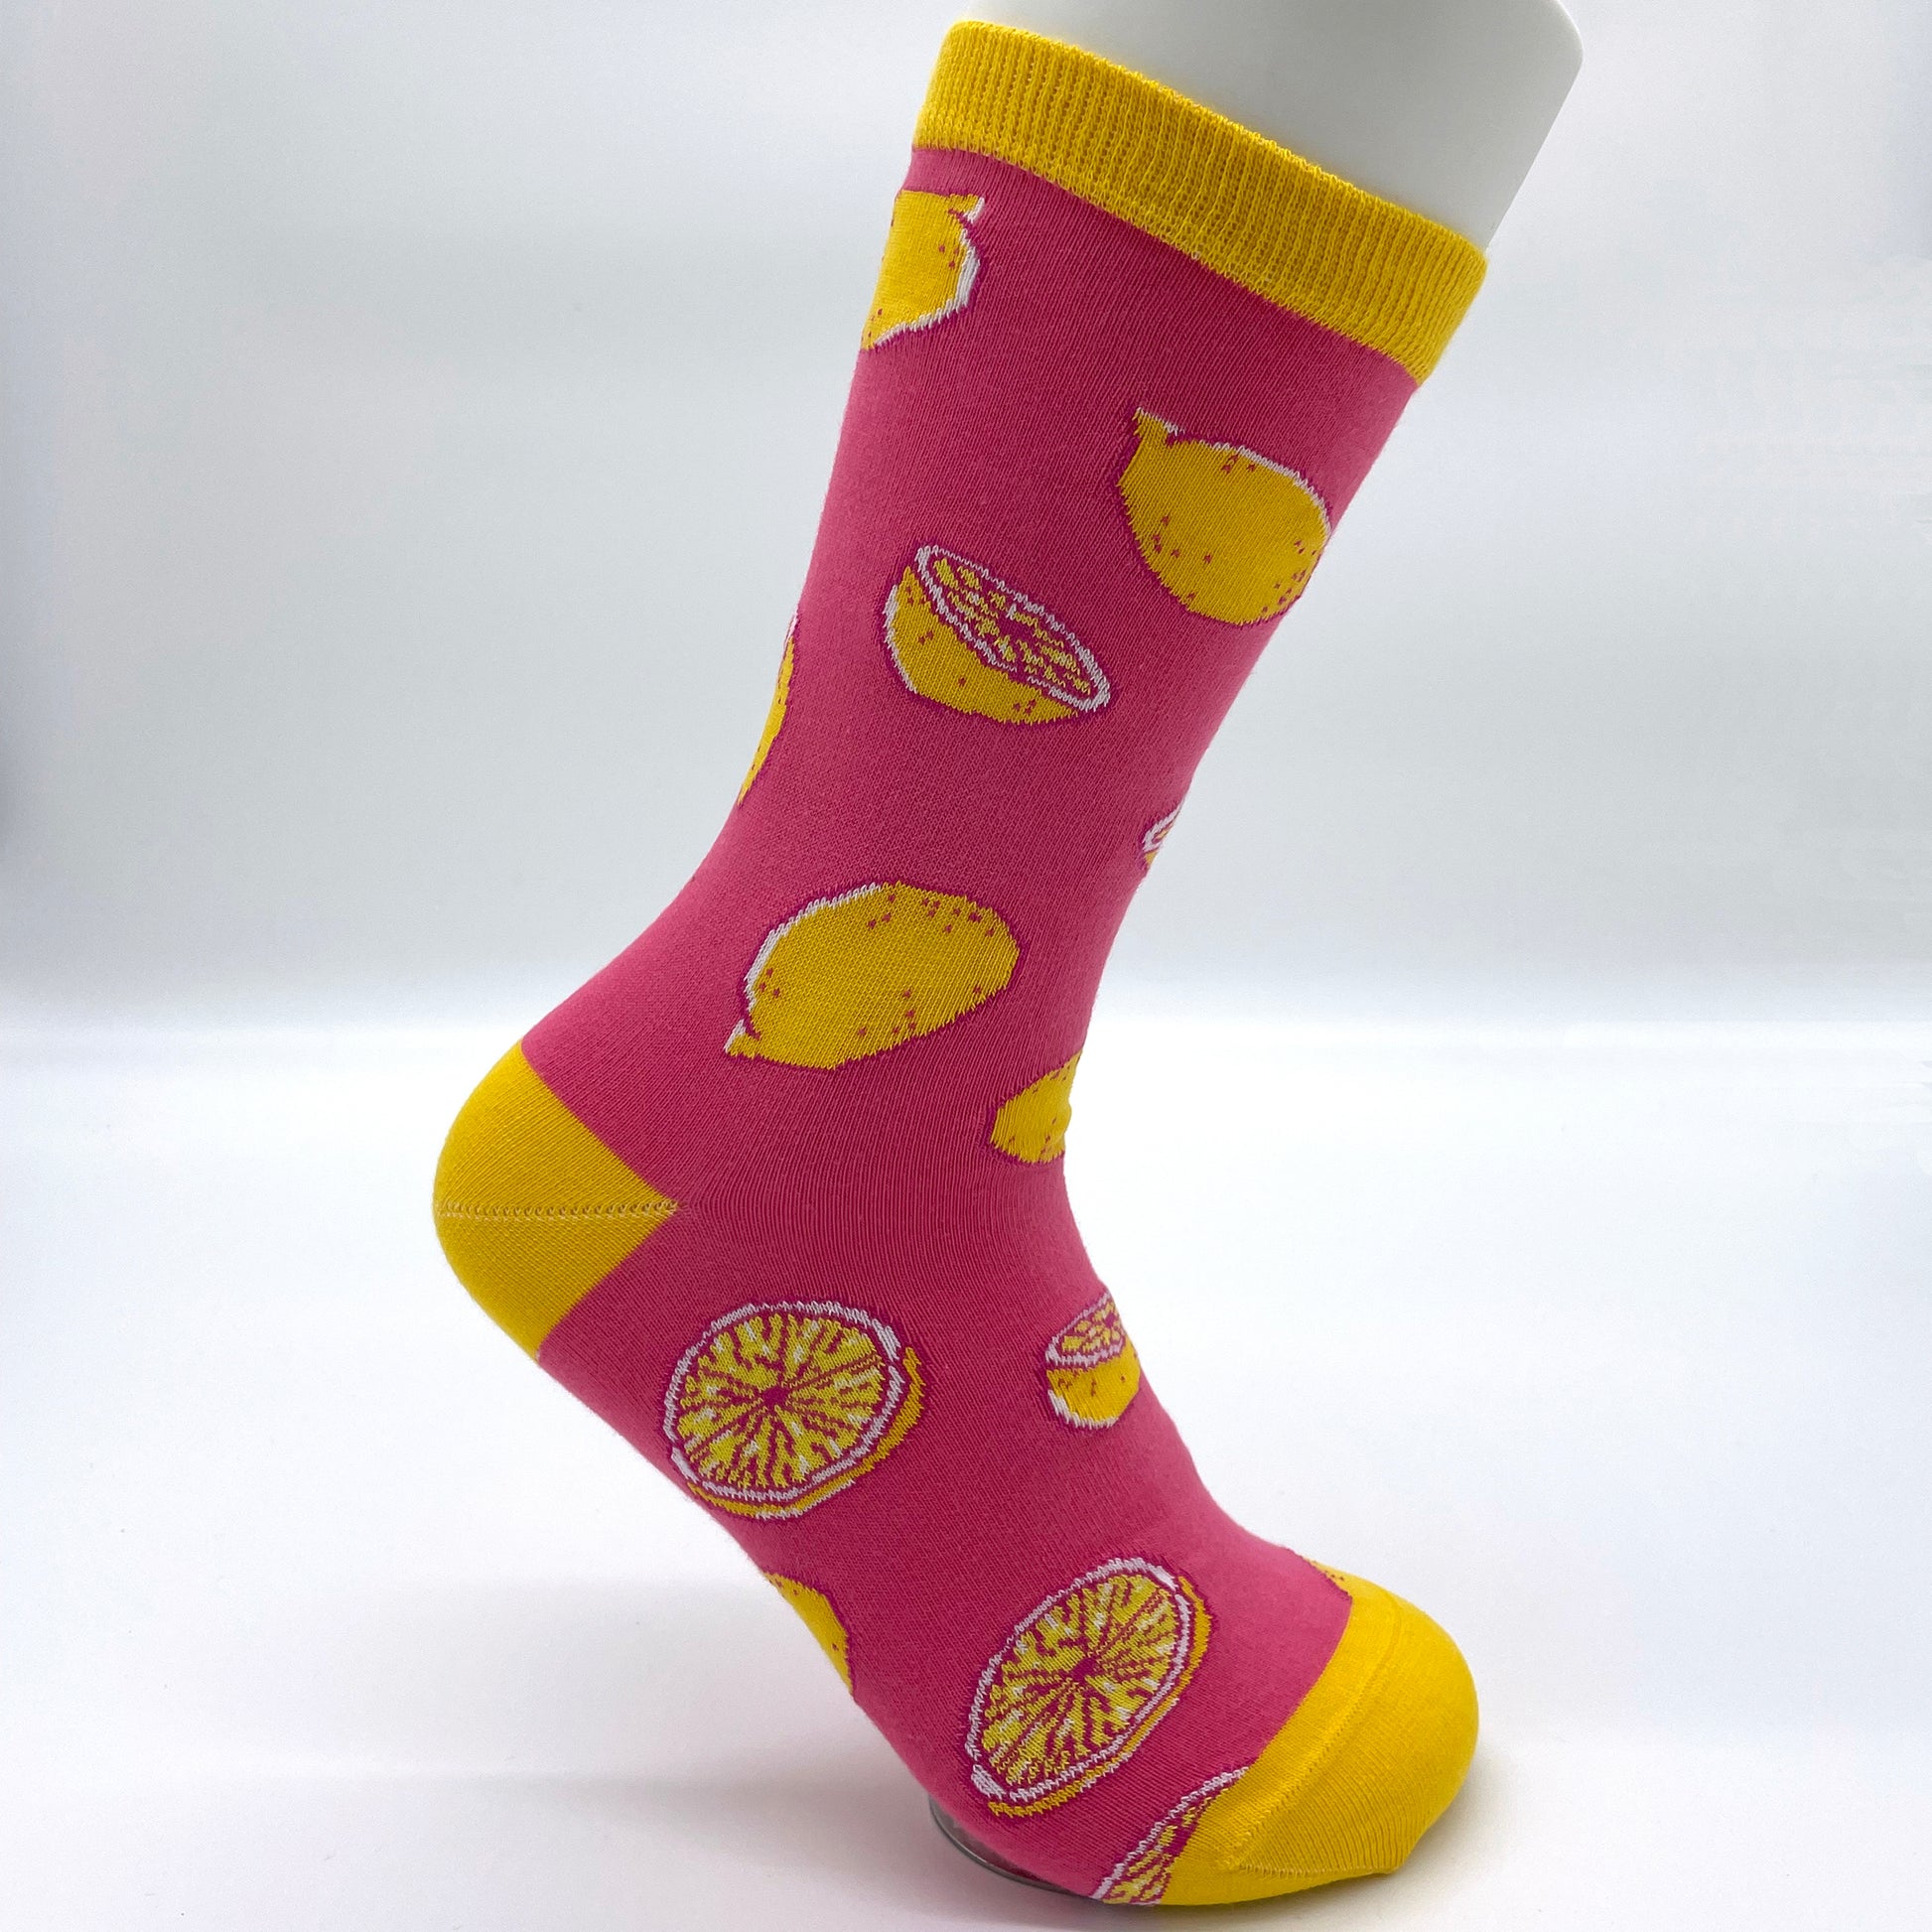 A white sock mannequin sports a pink sock patterned with yellow lemons. The welt, heel and toe are yellow.